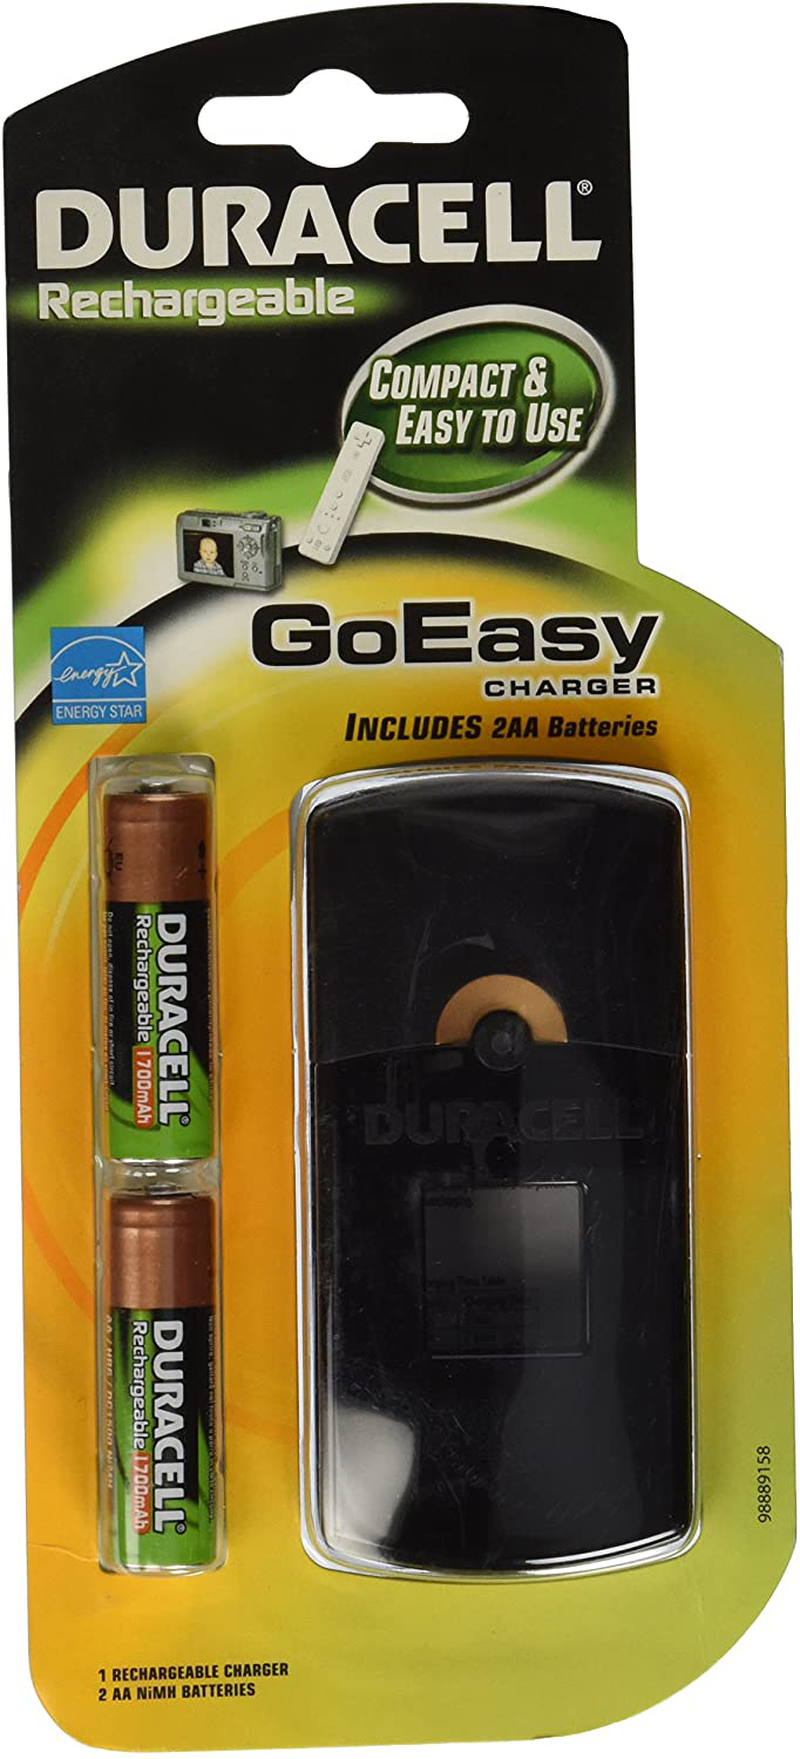 Duracell GoEasy Charger/Rechargable/Includes 2 AA Rechargeable Batteries,